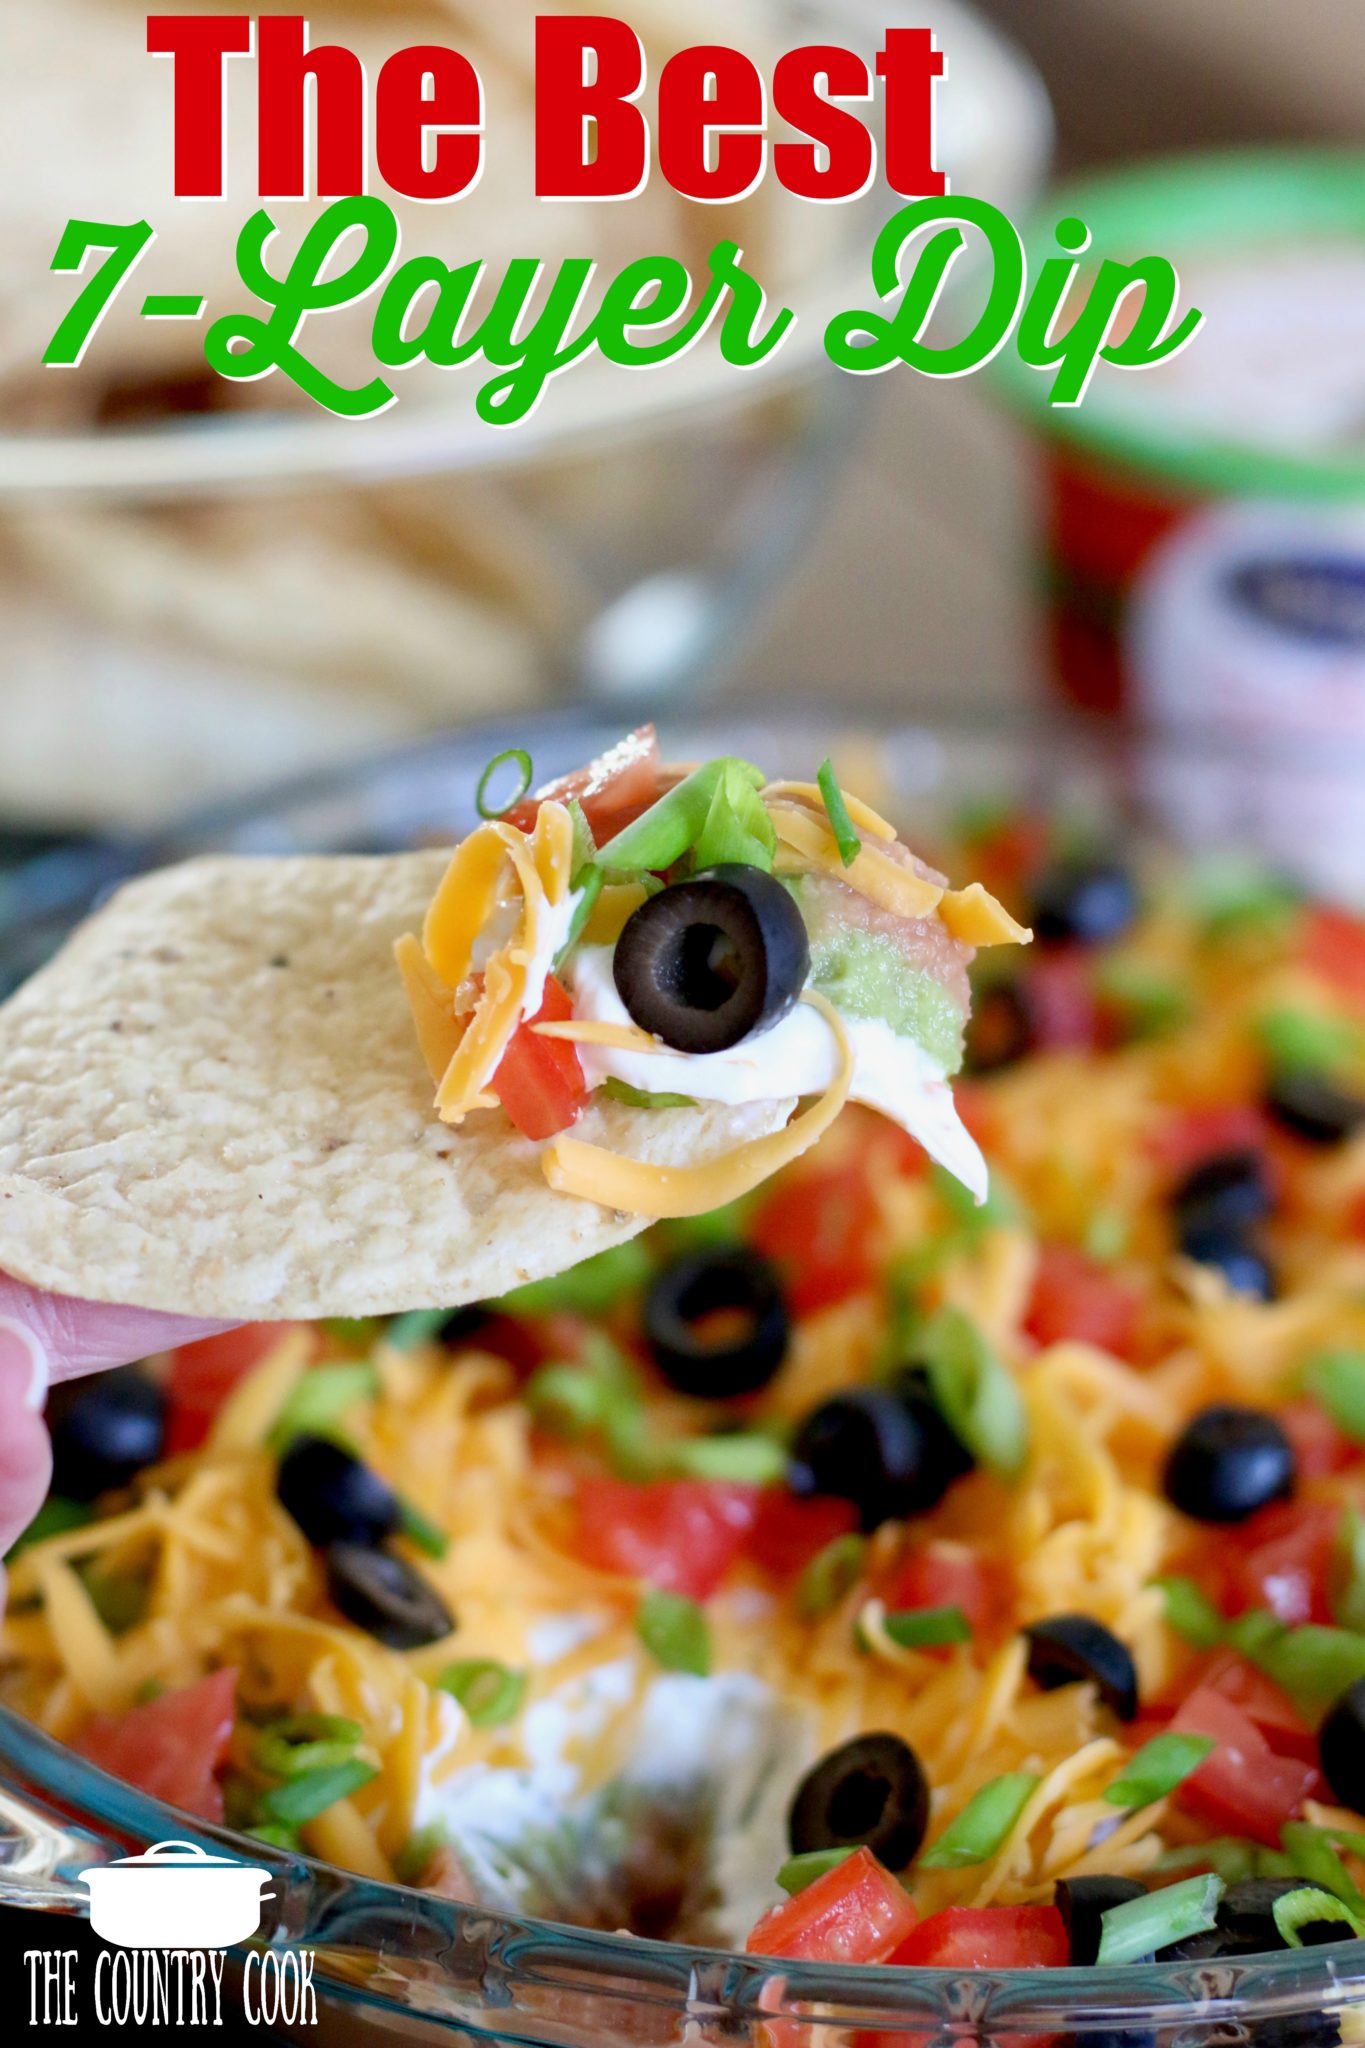 The Best Mexican 7-Layer Dip recipe from The Country Cook.